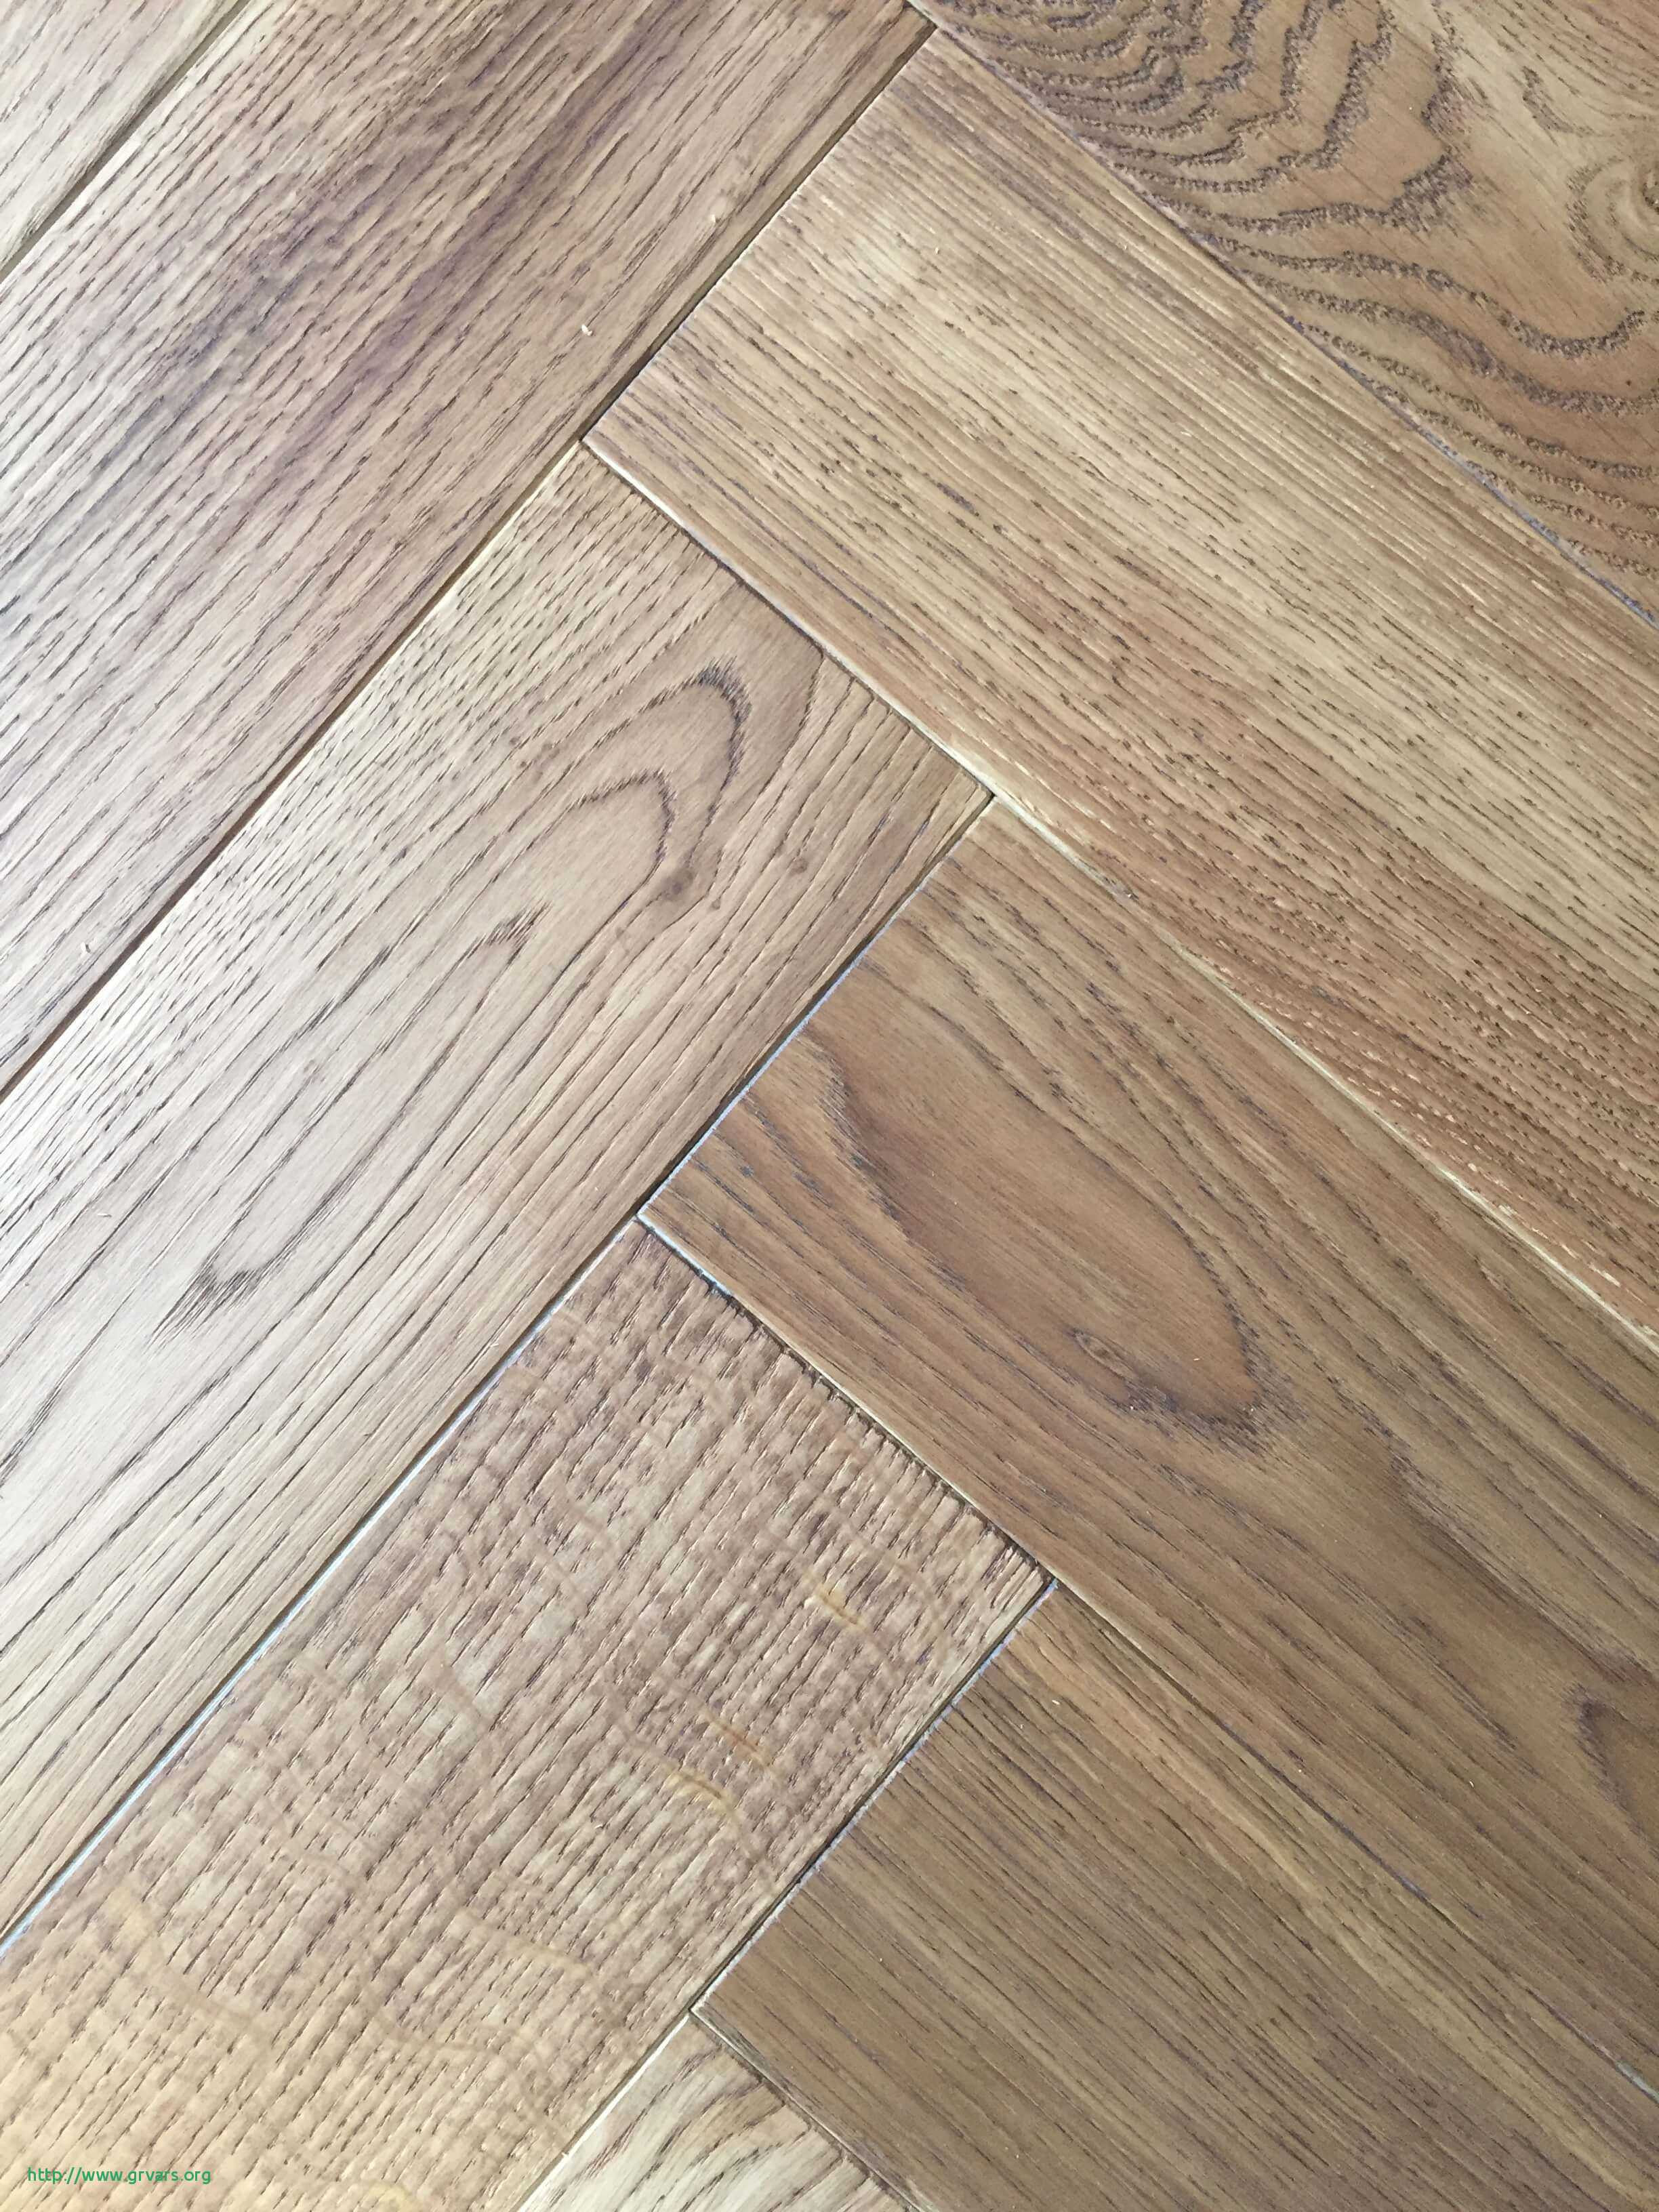 solid hardwood floor underlayment options of 21 nouveau how much is laminate flooring installed ideas blog for how much is laminate flooring installed frais laminate flooring ideas